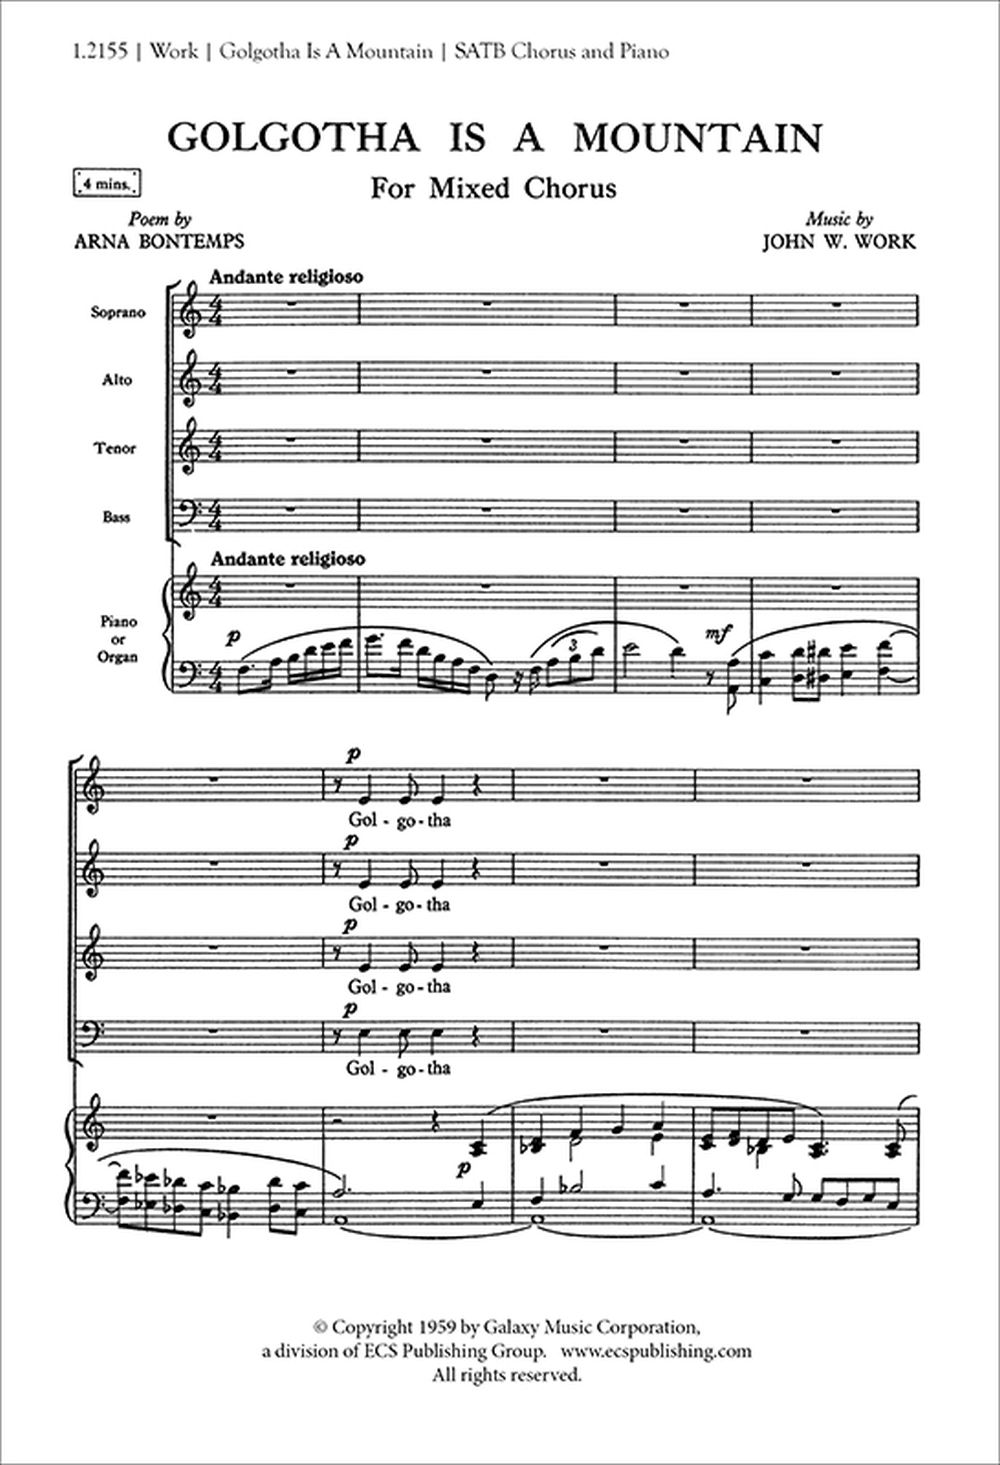 John Wesley Work: Golgotha Is A Mountain: SATB: Score and Parts